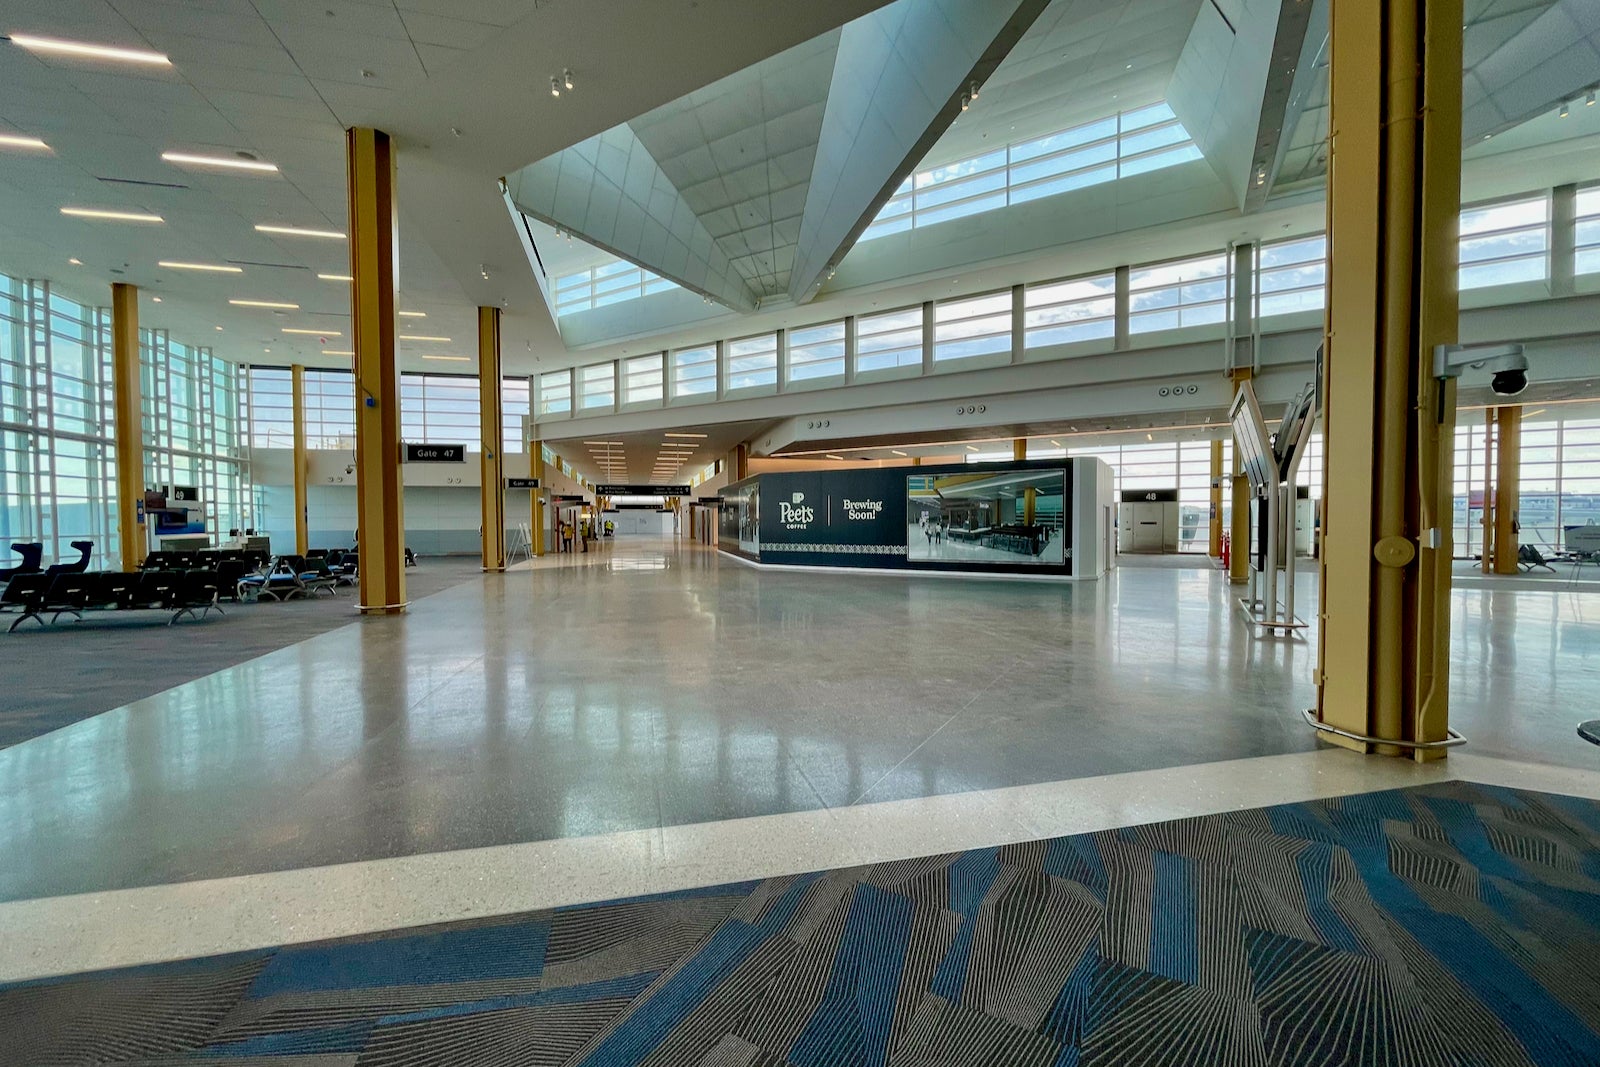 First look: New concourse at Washington D.C.'s Reagan National